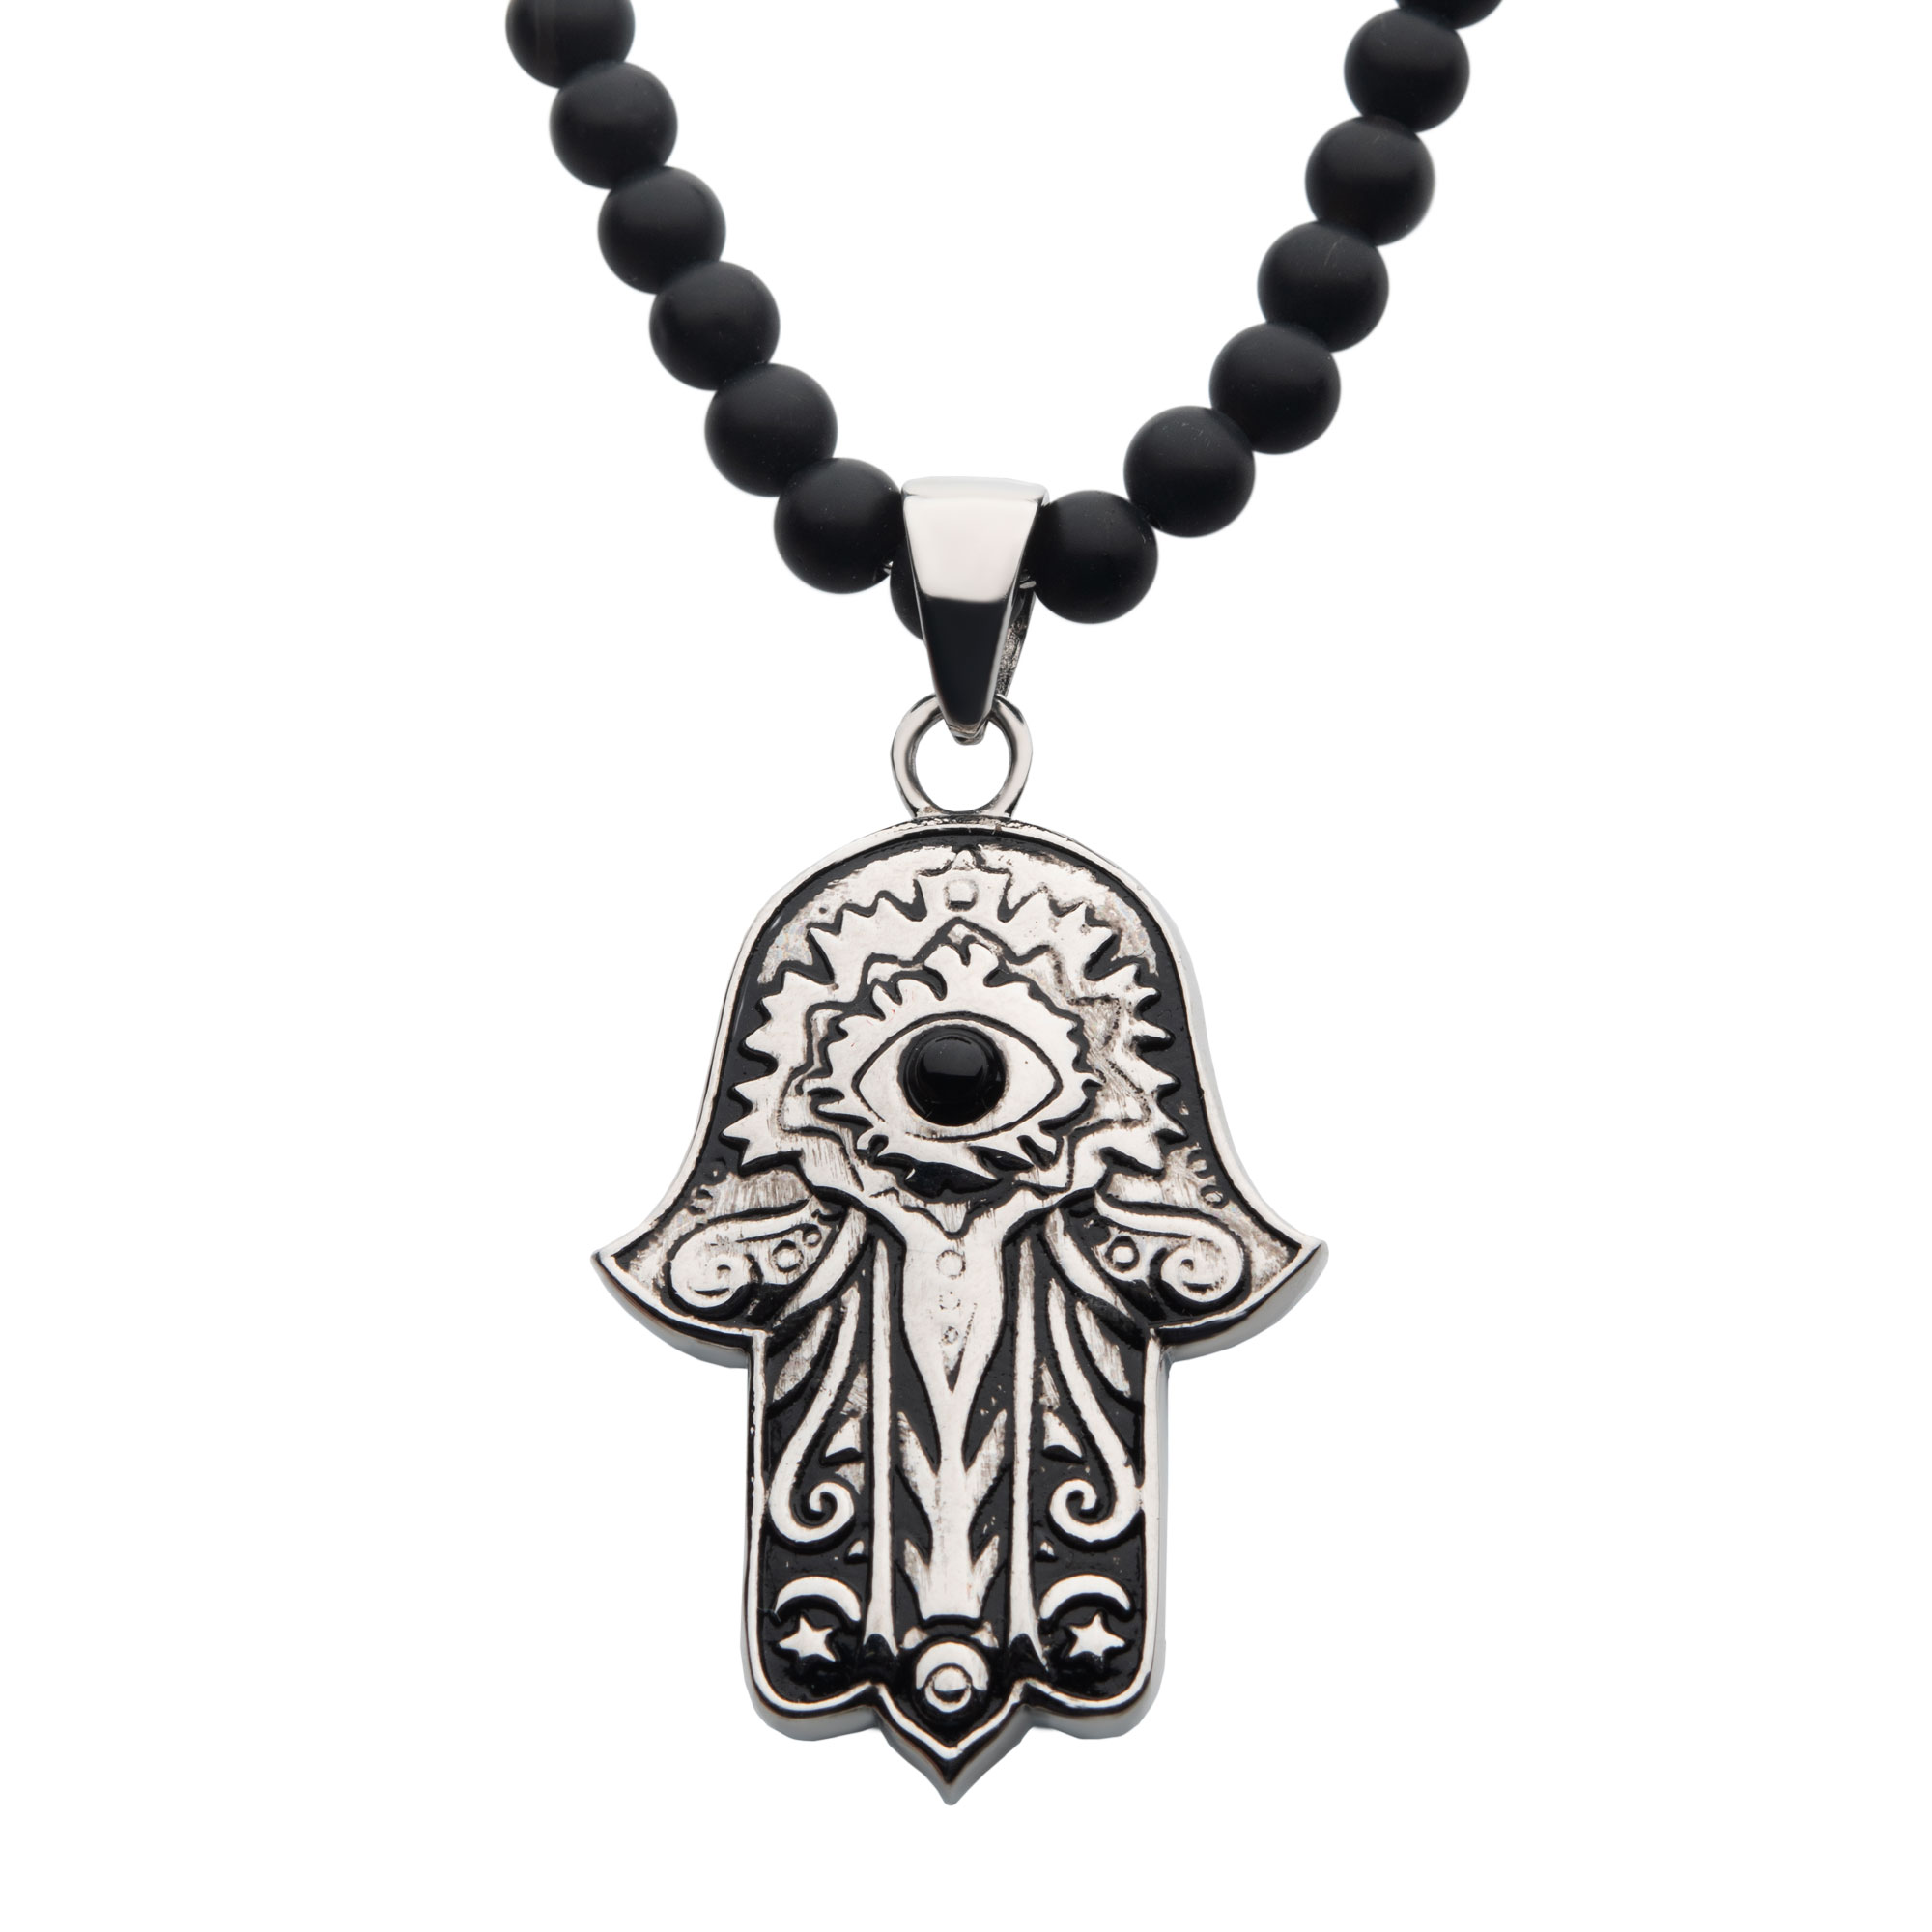 Stainless Steel with Centerpiece Black Agate Stone Hamsa Pendant, with Black Agate Stone Bead Necklace P.K. Bennett Jewelers Mundelein, IL